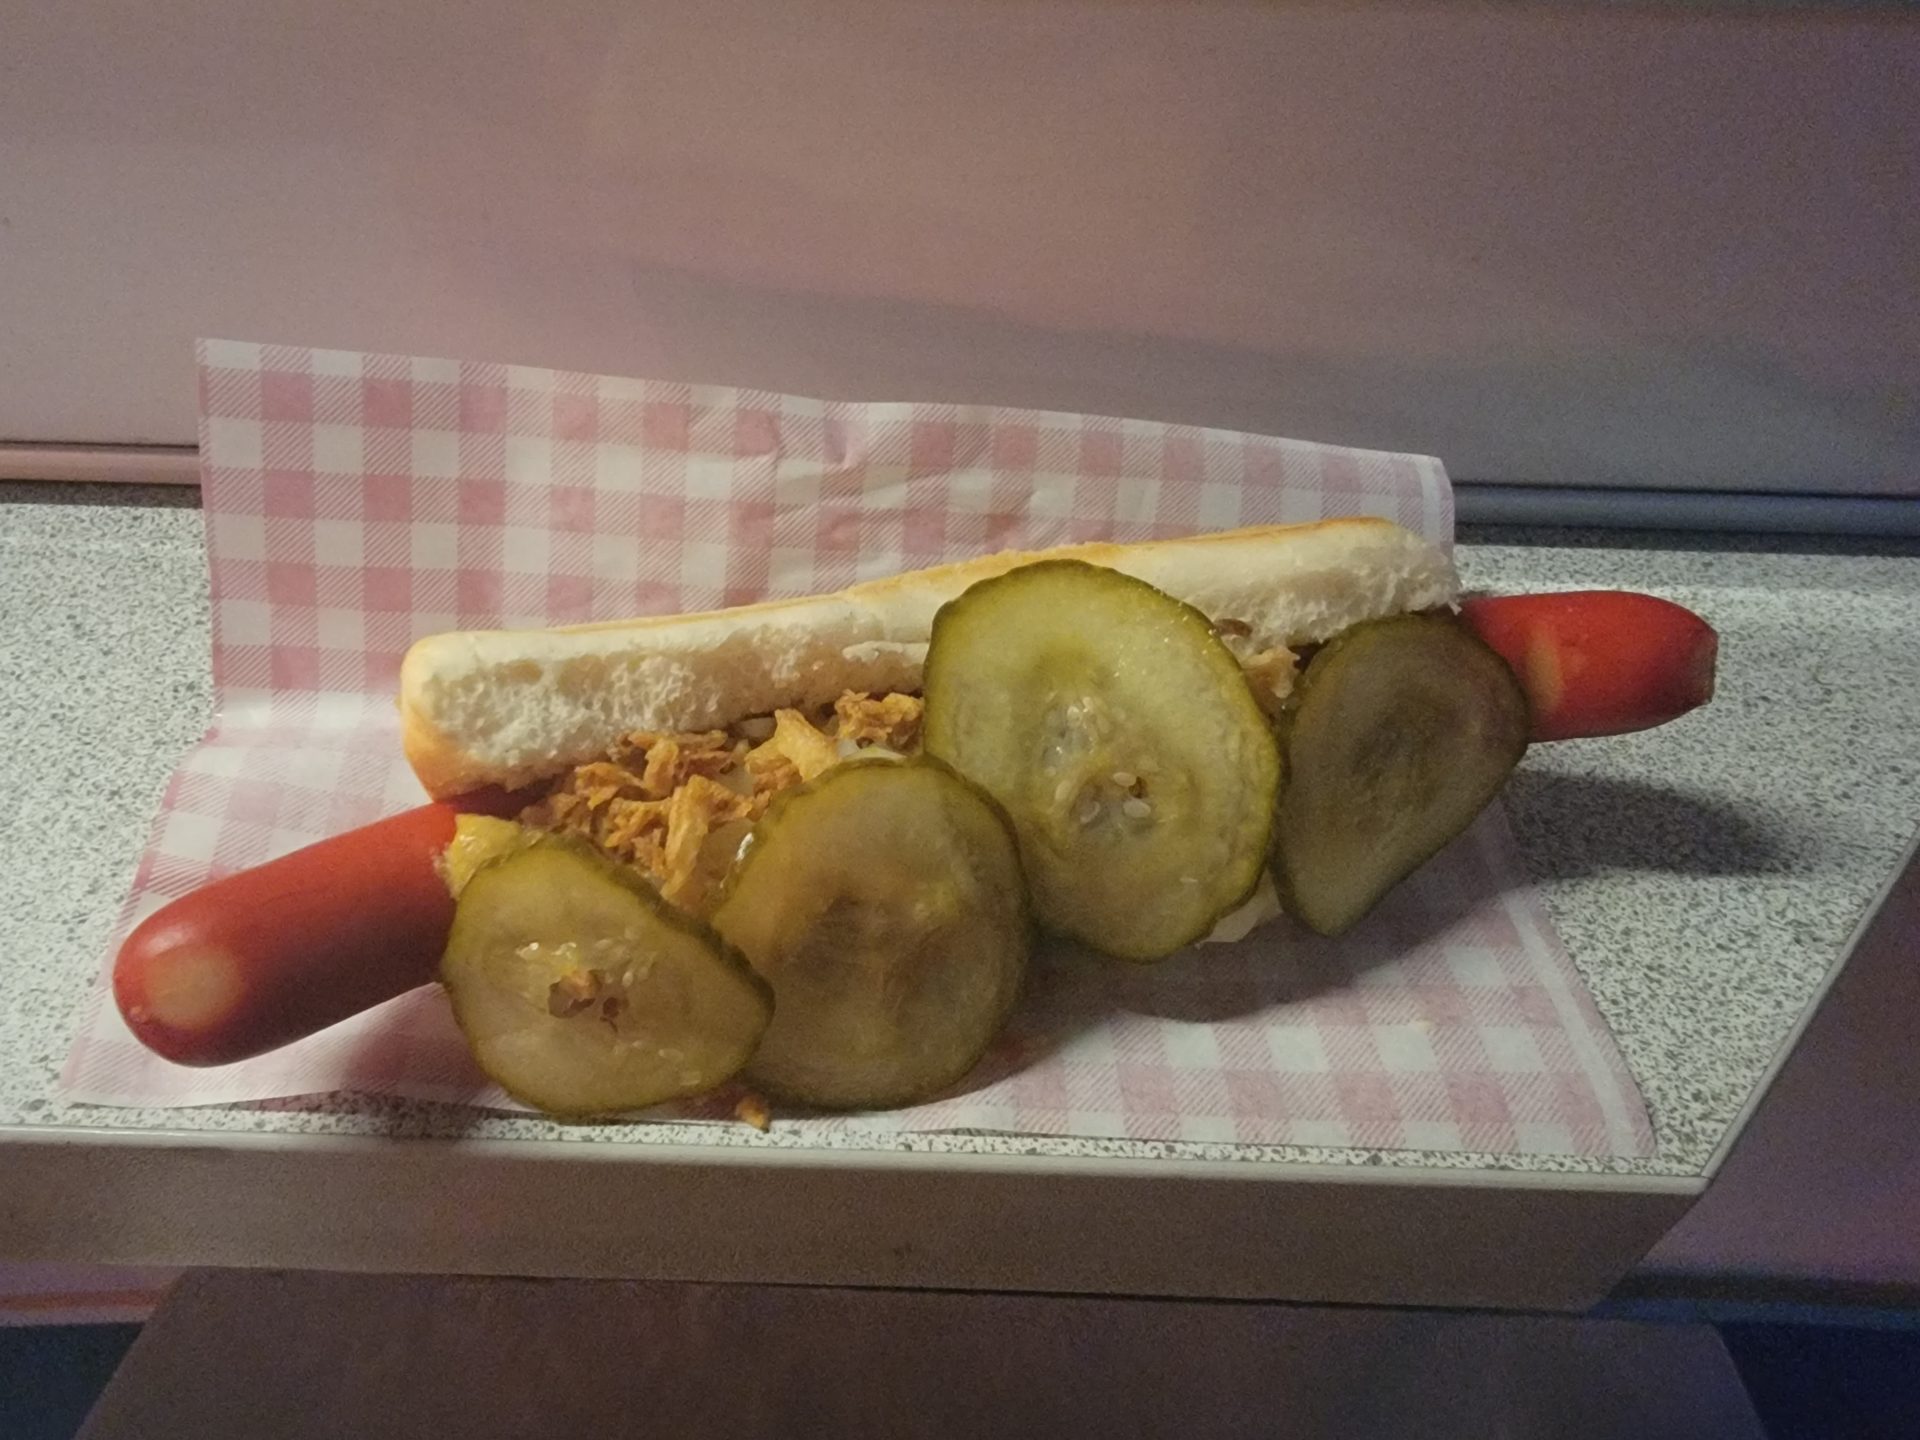 a hot dog with pickles and a bun